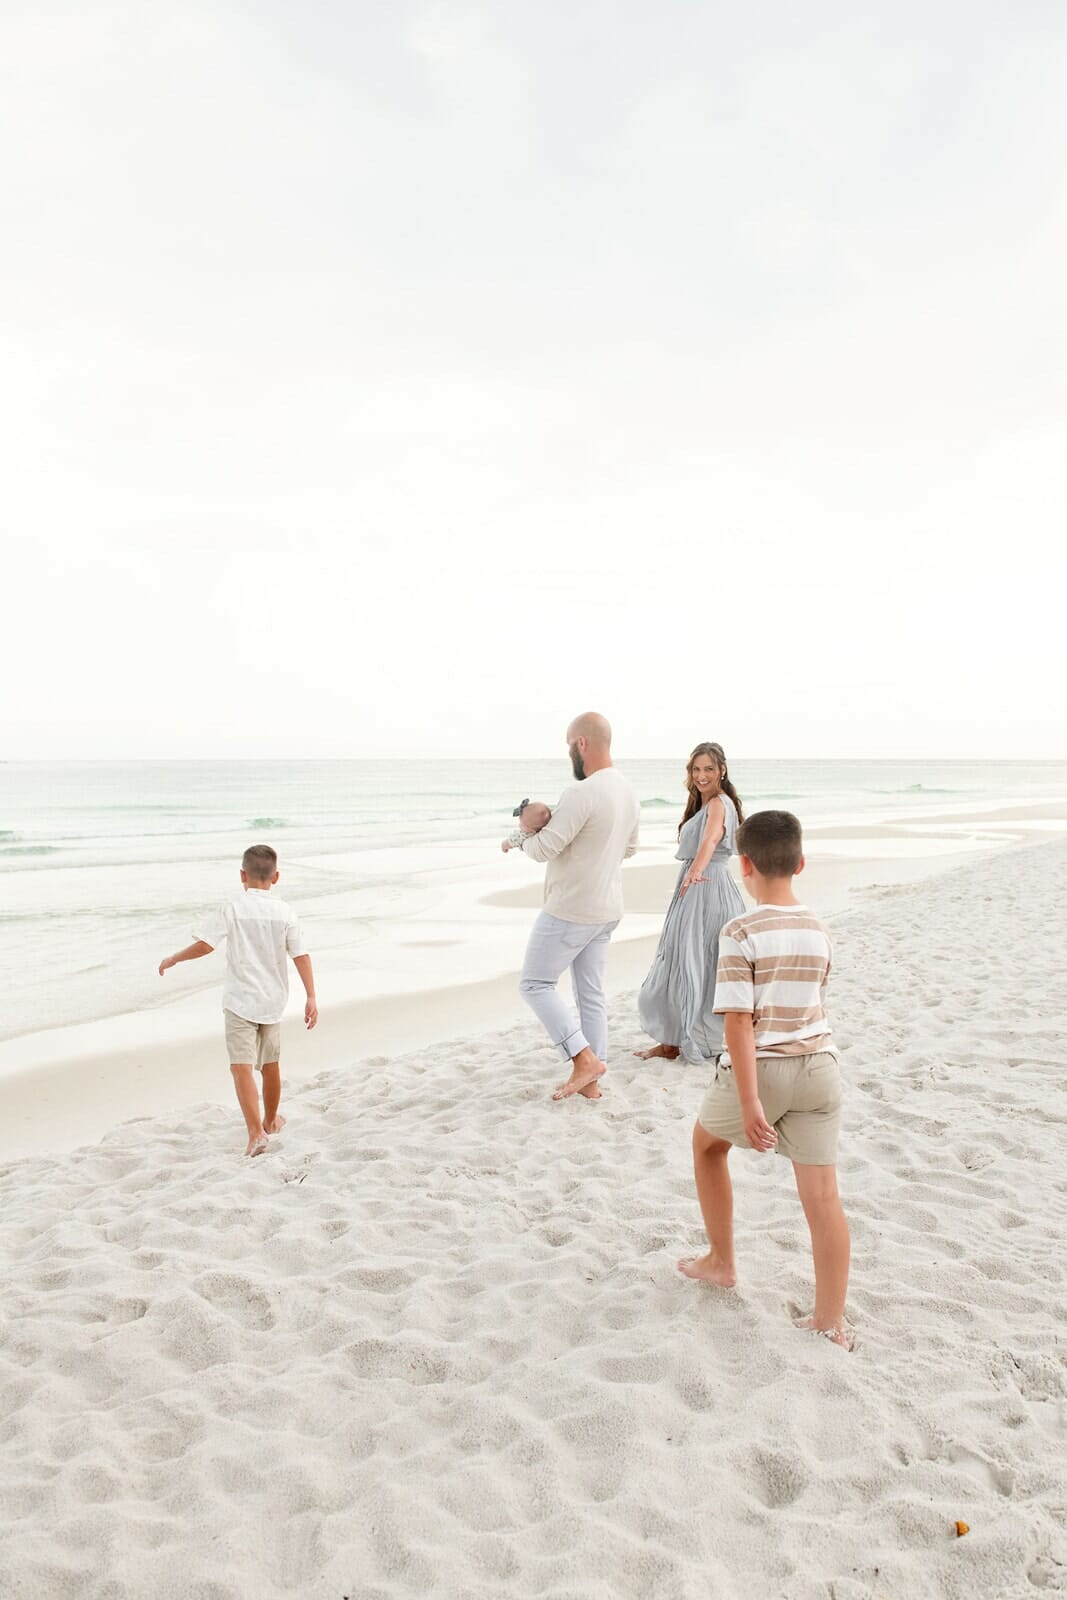 A family is playing on the beach with their children.